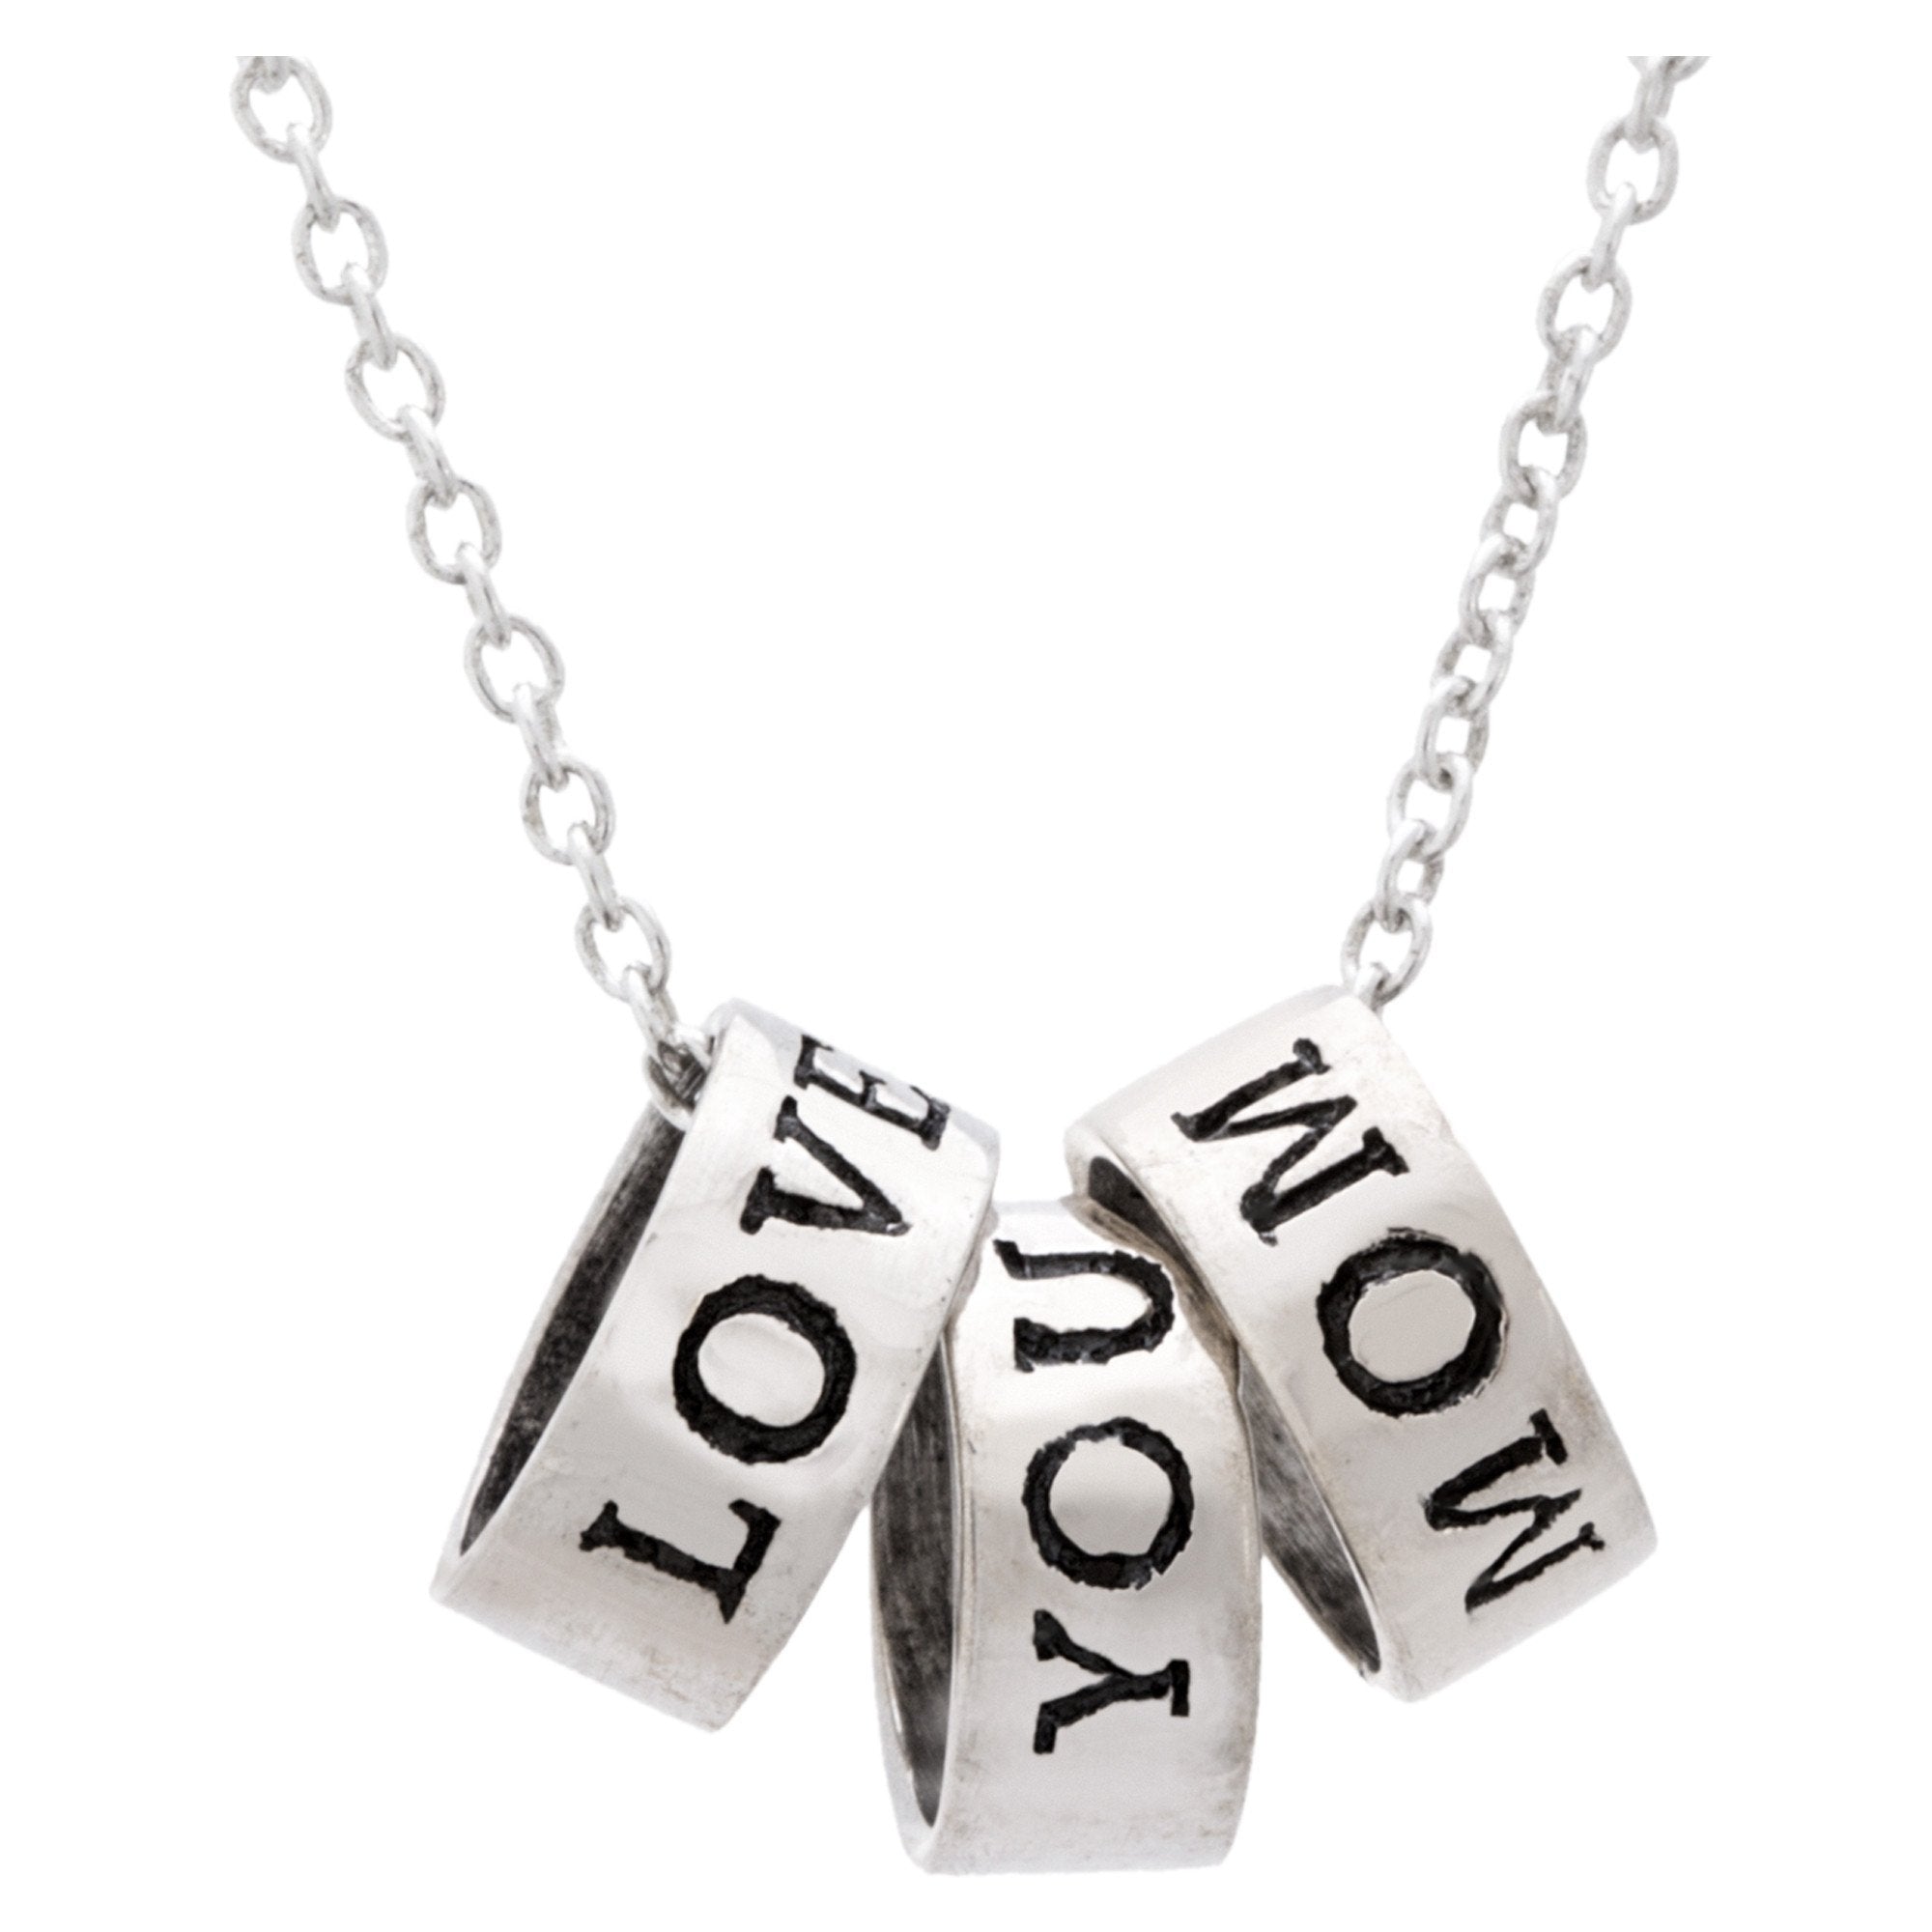 Love You Mom Sterling Necklace - With Sterling Silver Chain